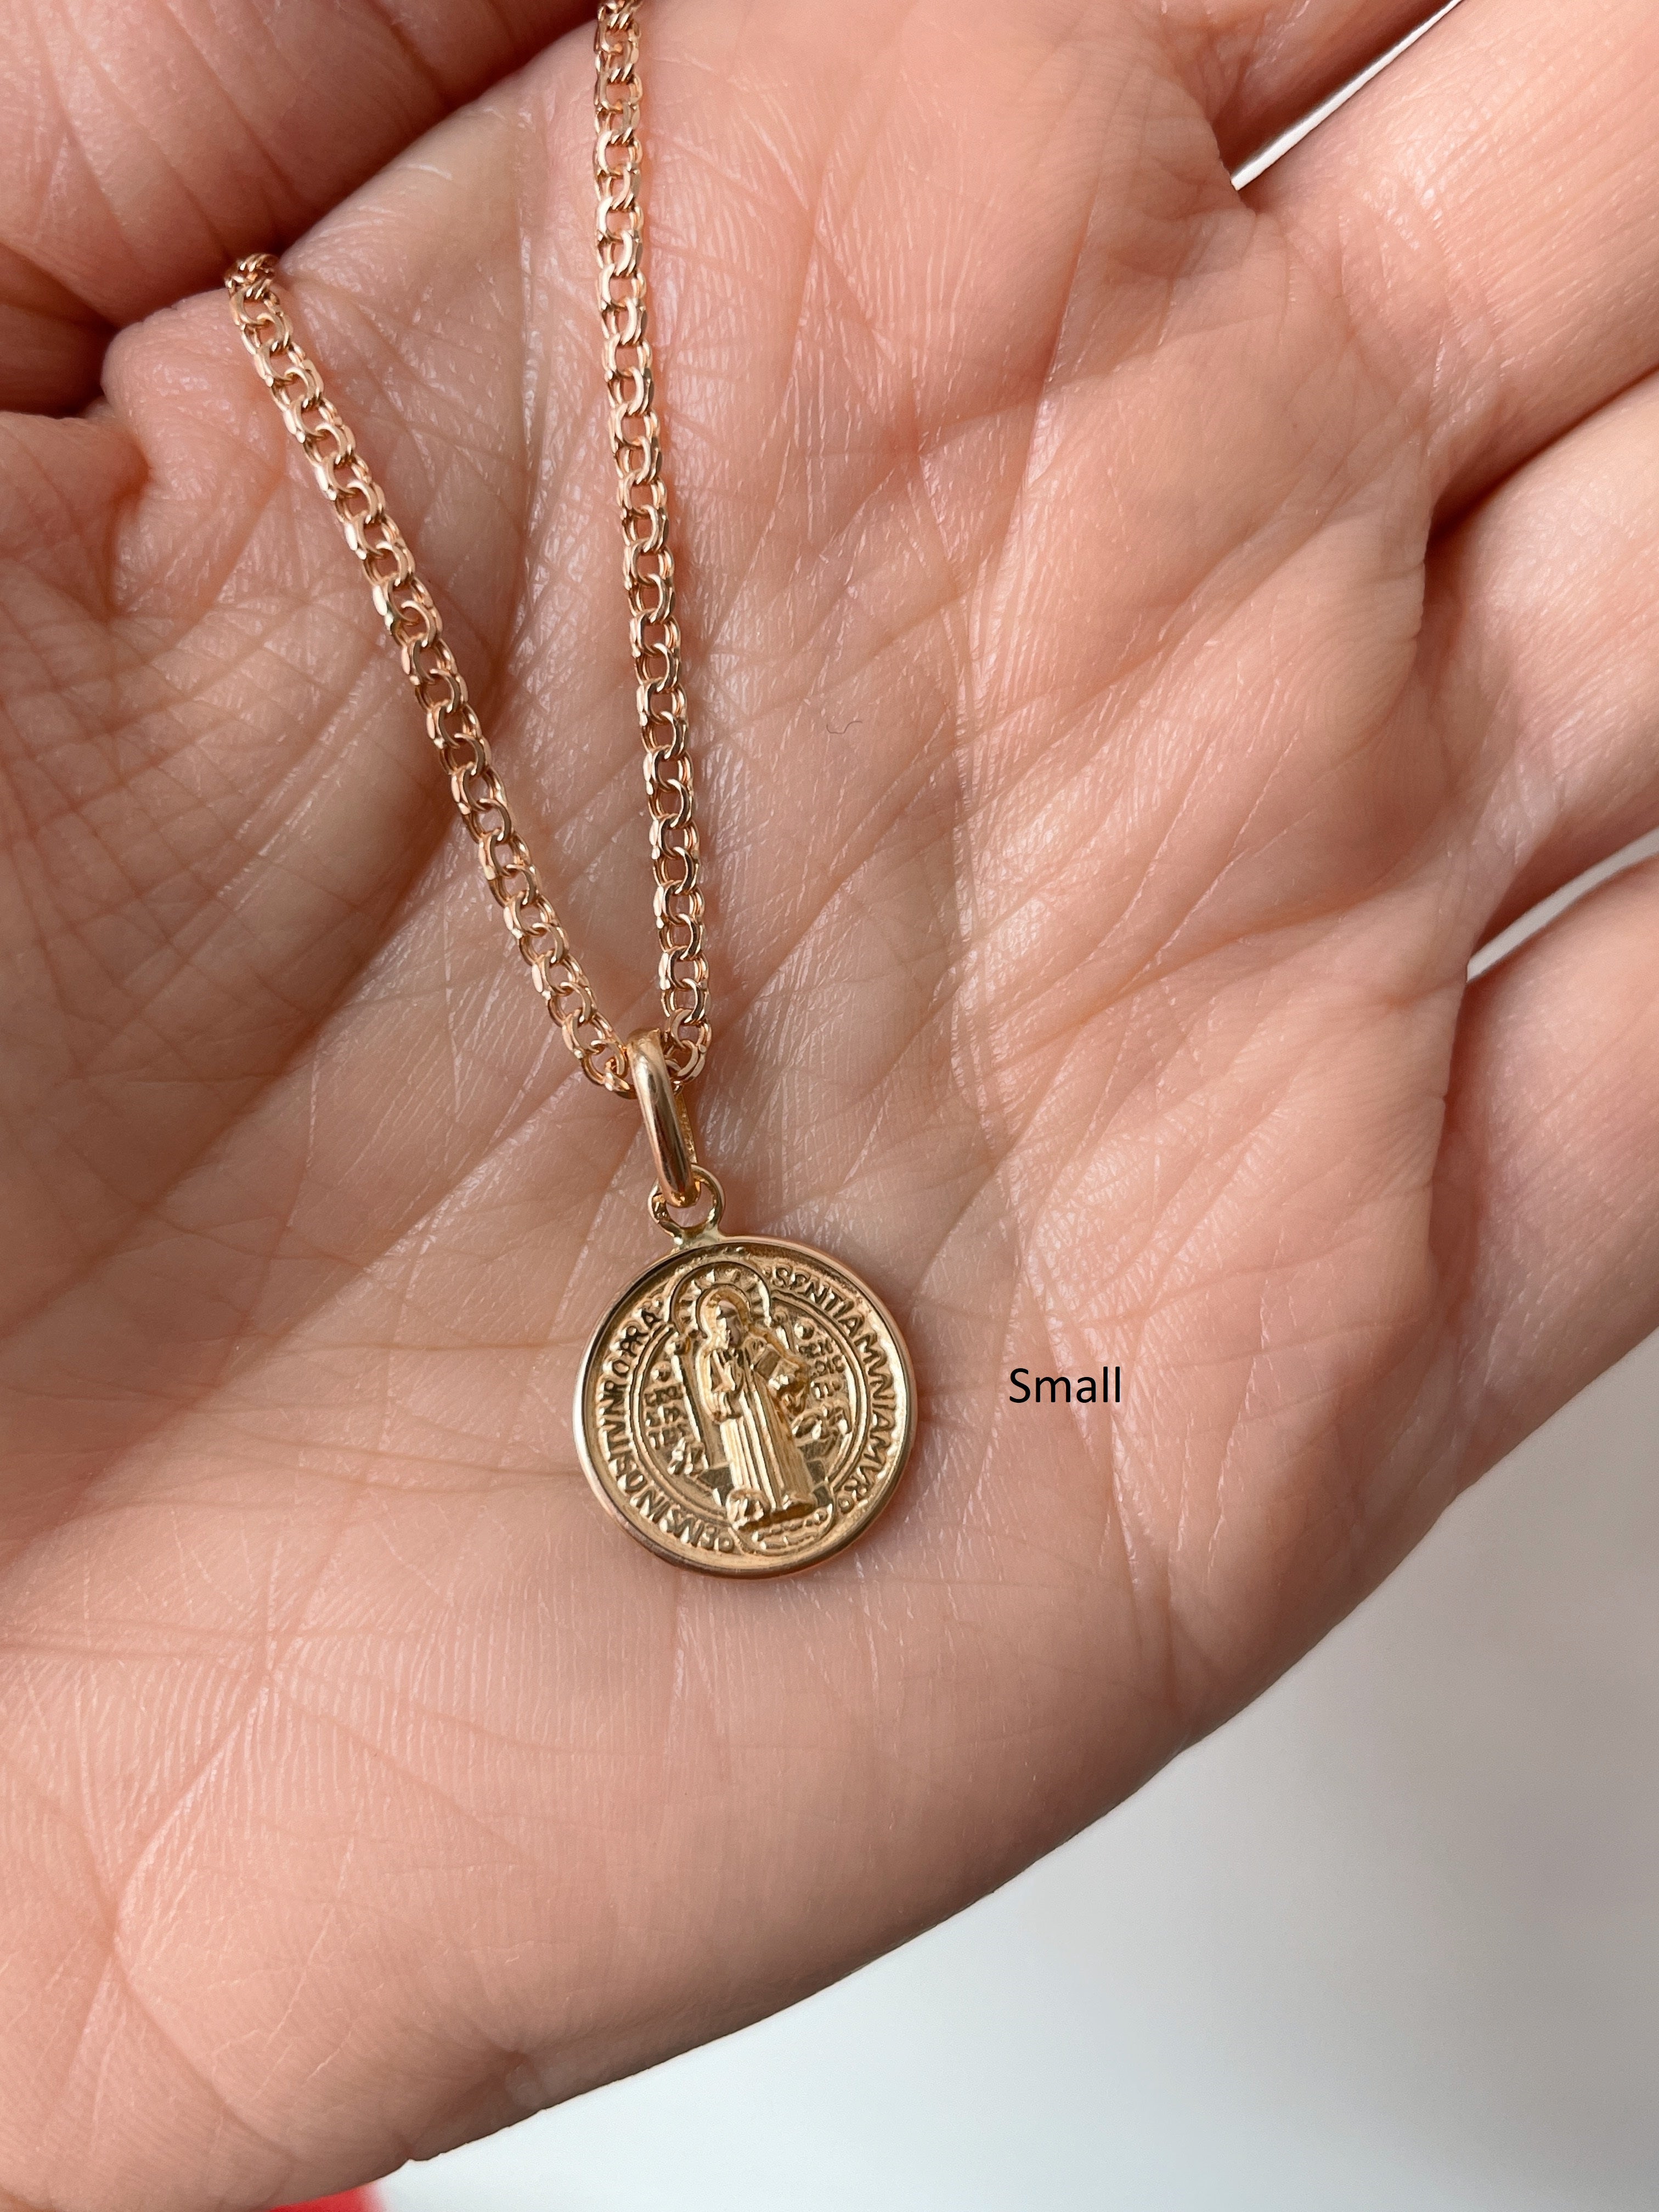 Saint Benedict Medal | Small Devotions | Religious Medals